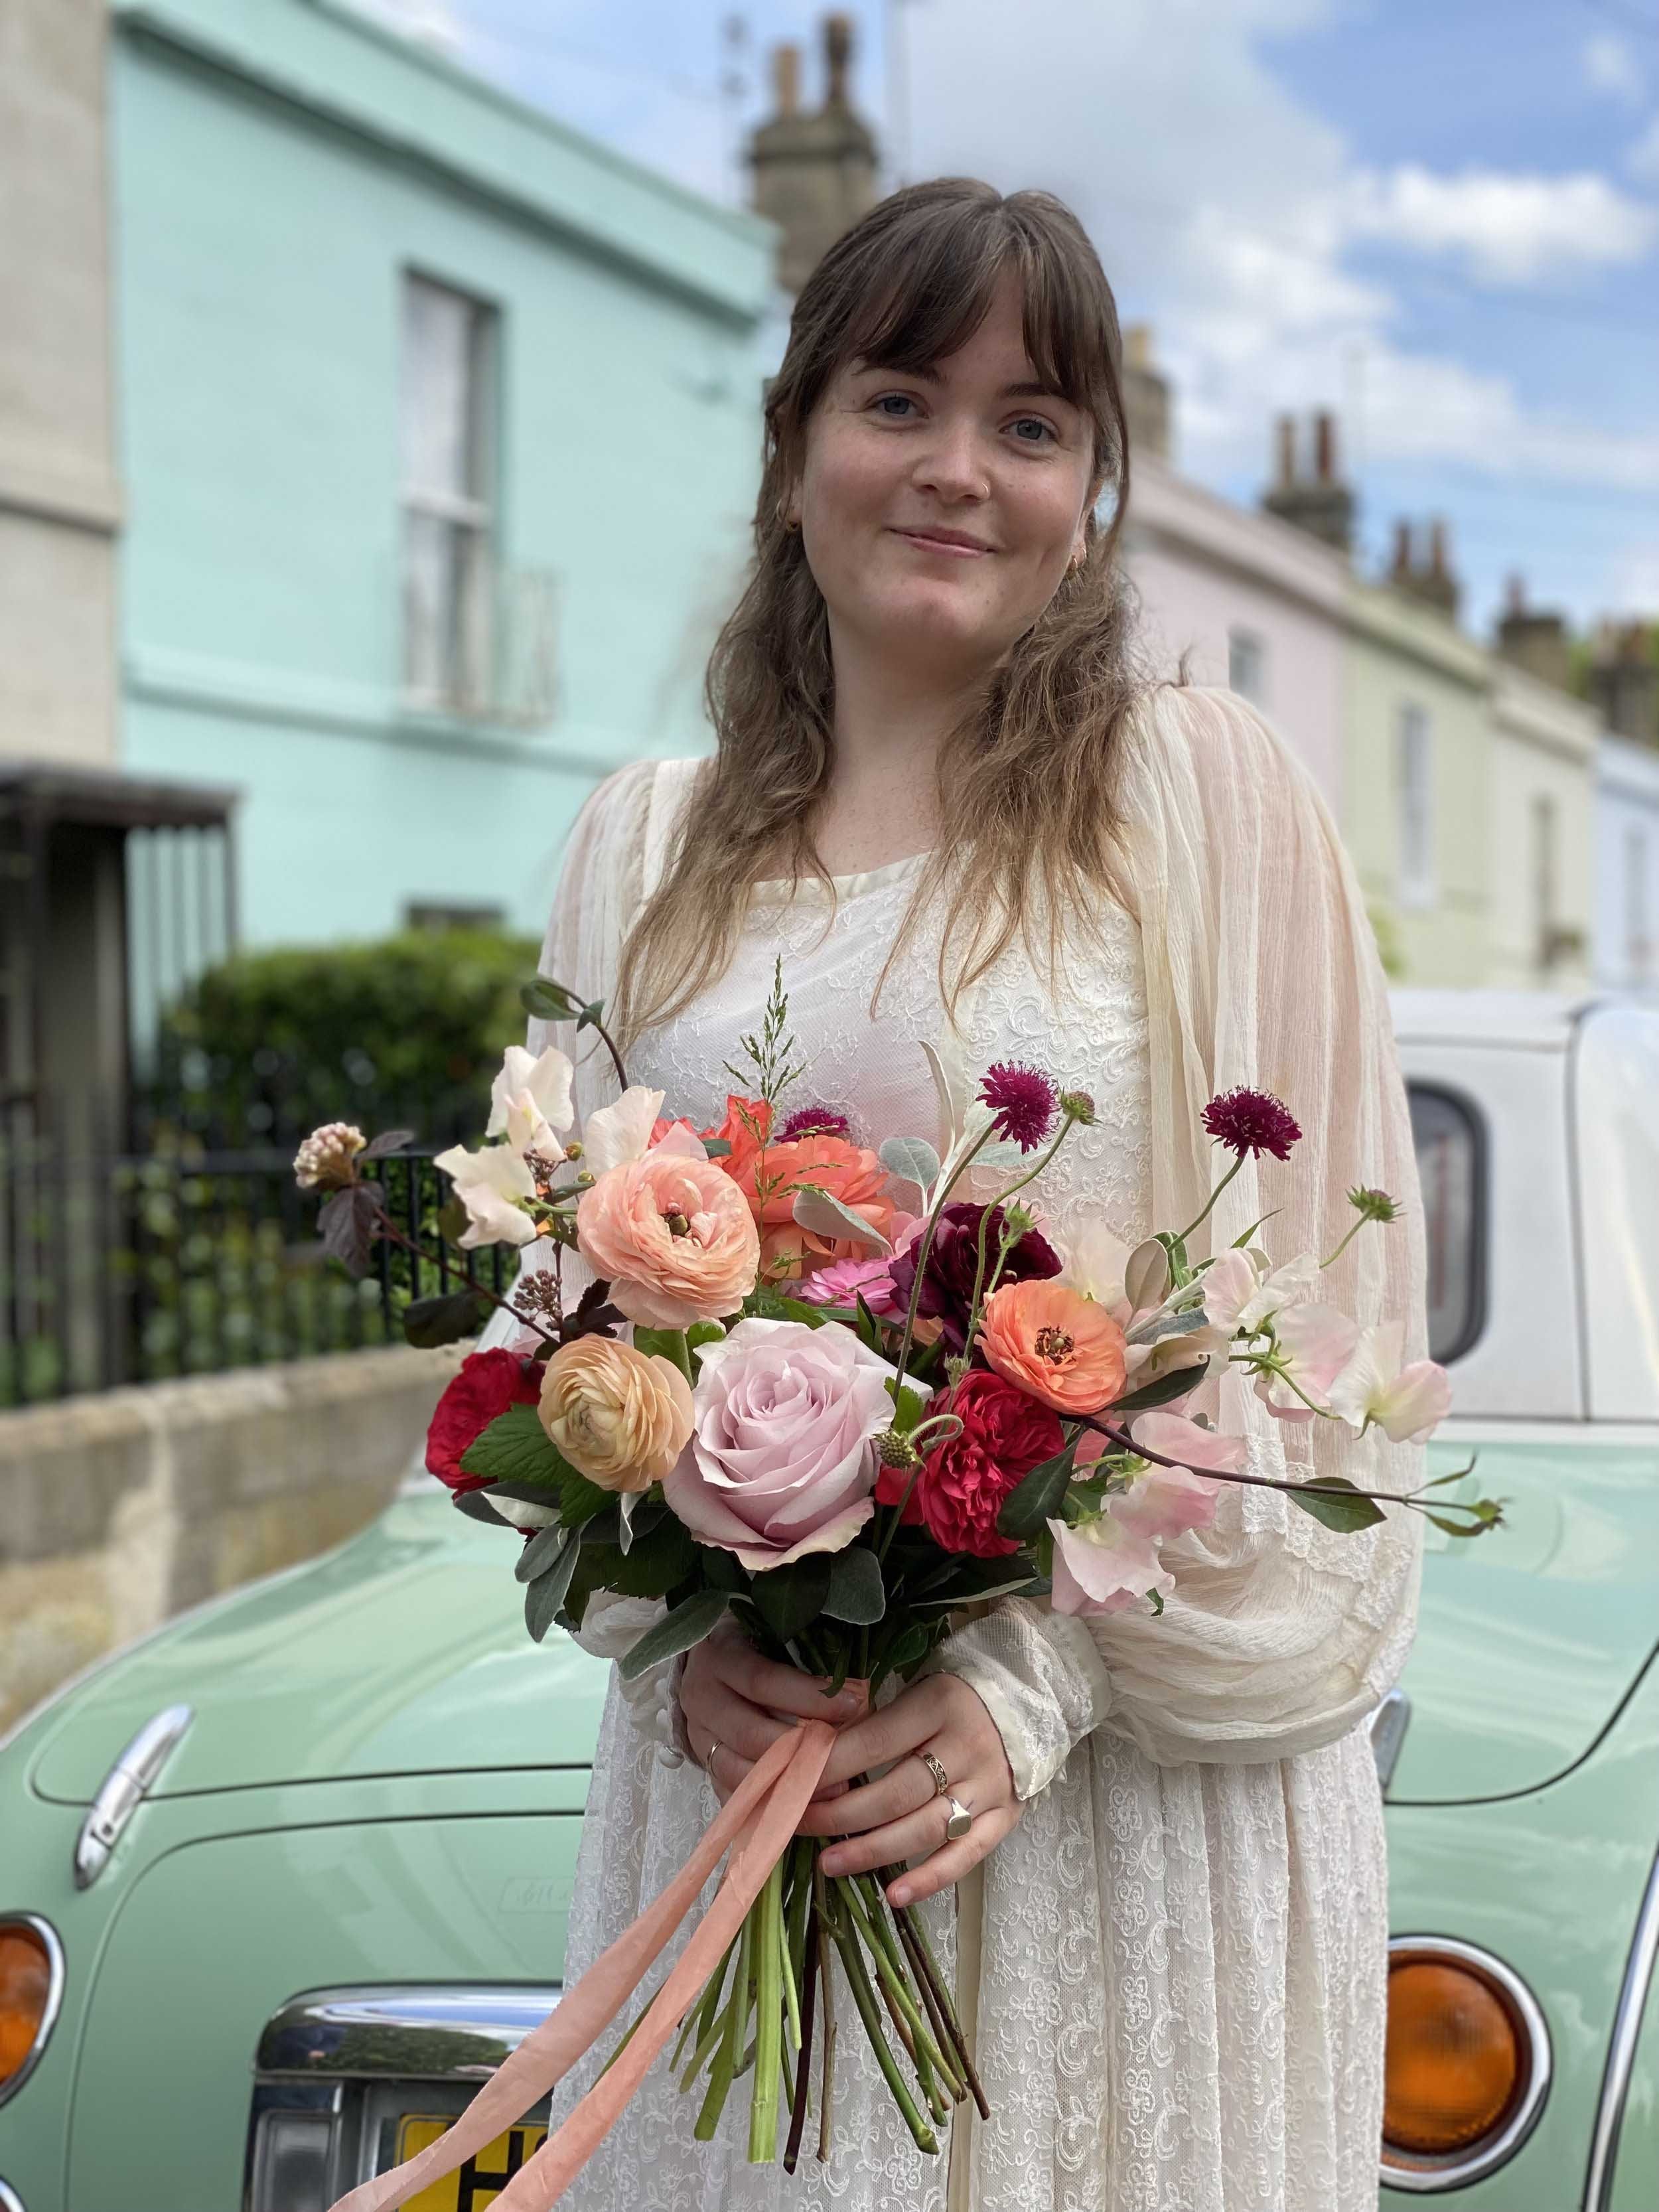 Seasonal bridal bouquet showcased by floristry student